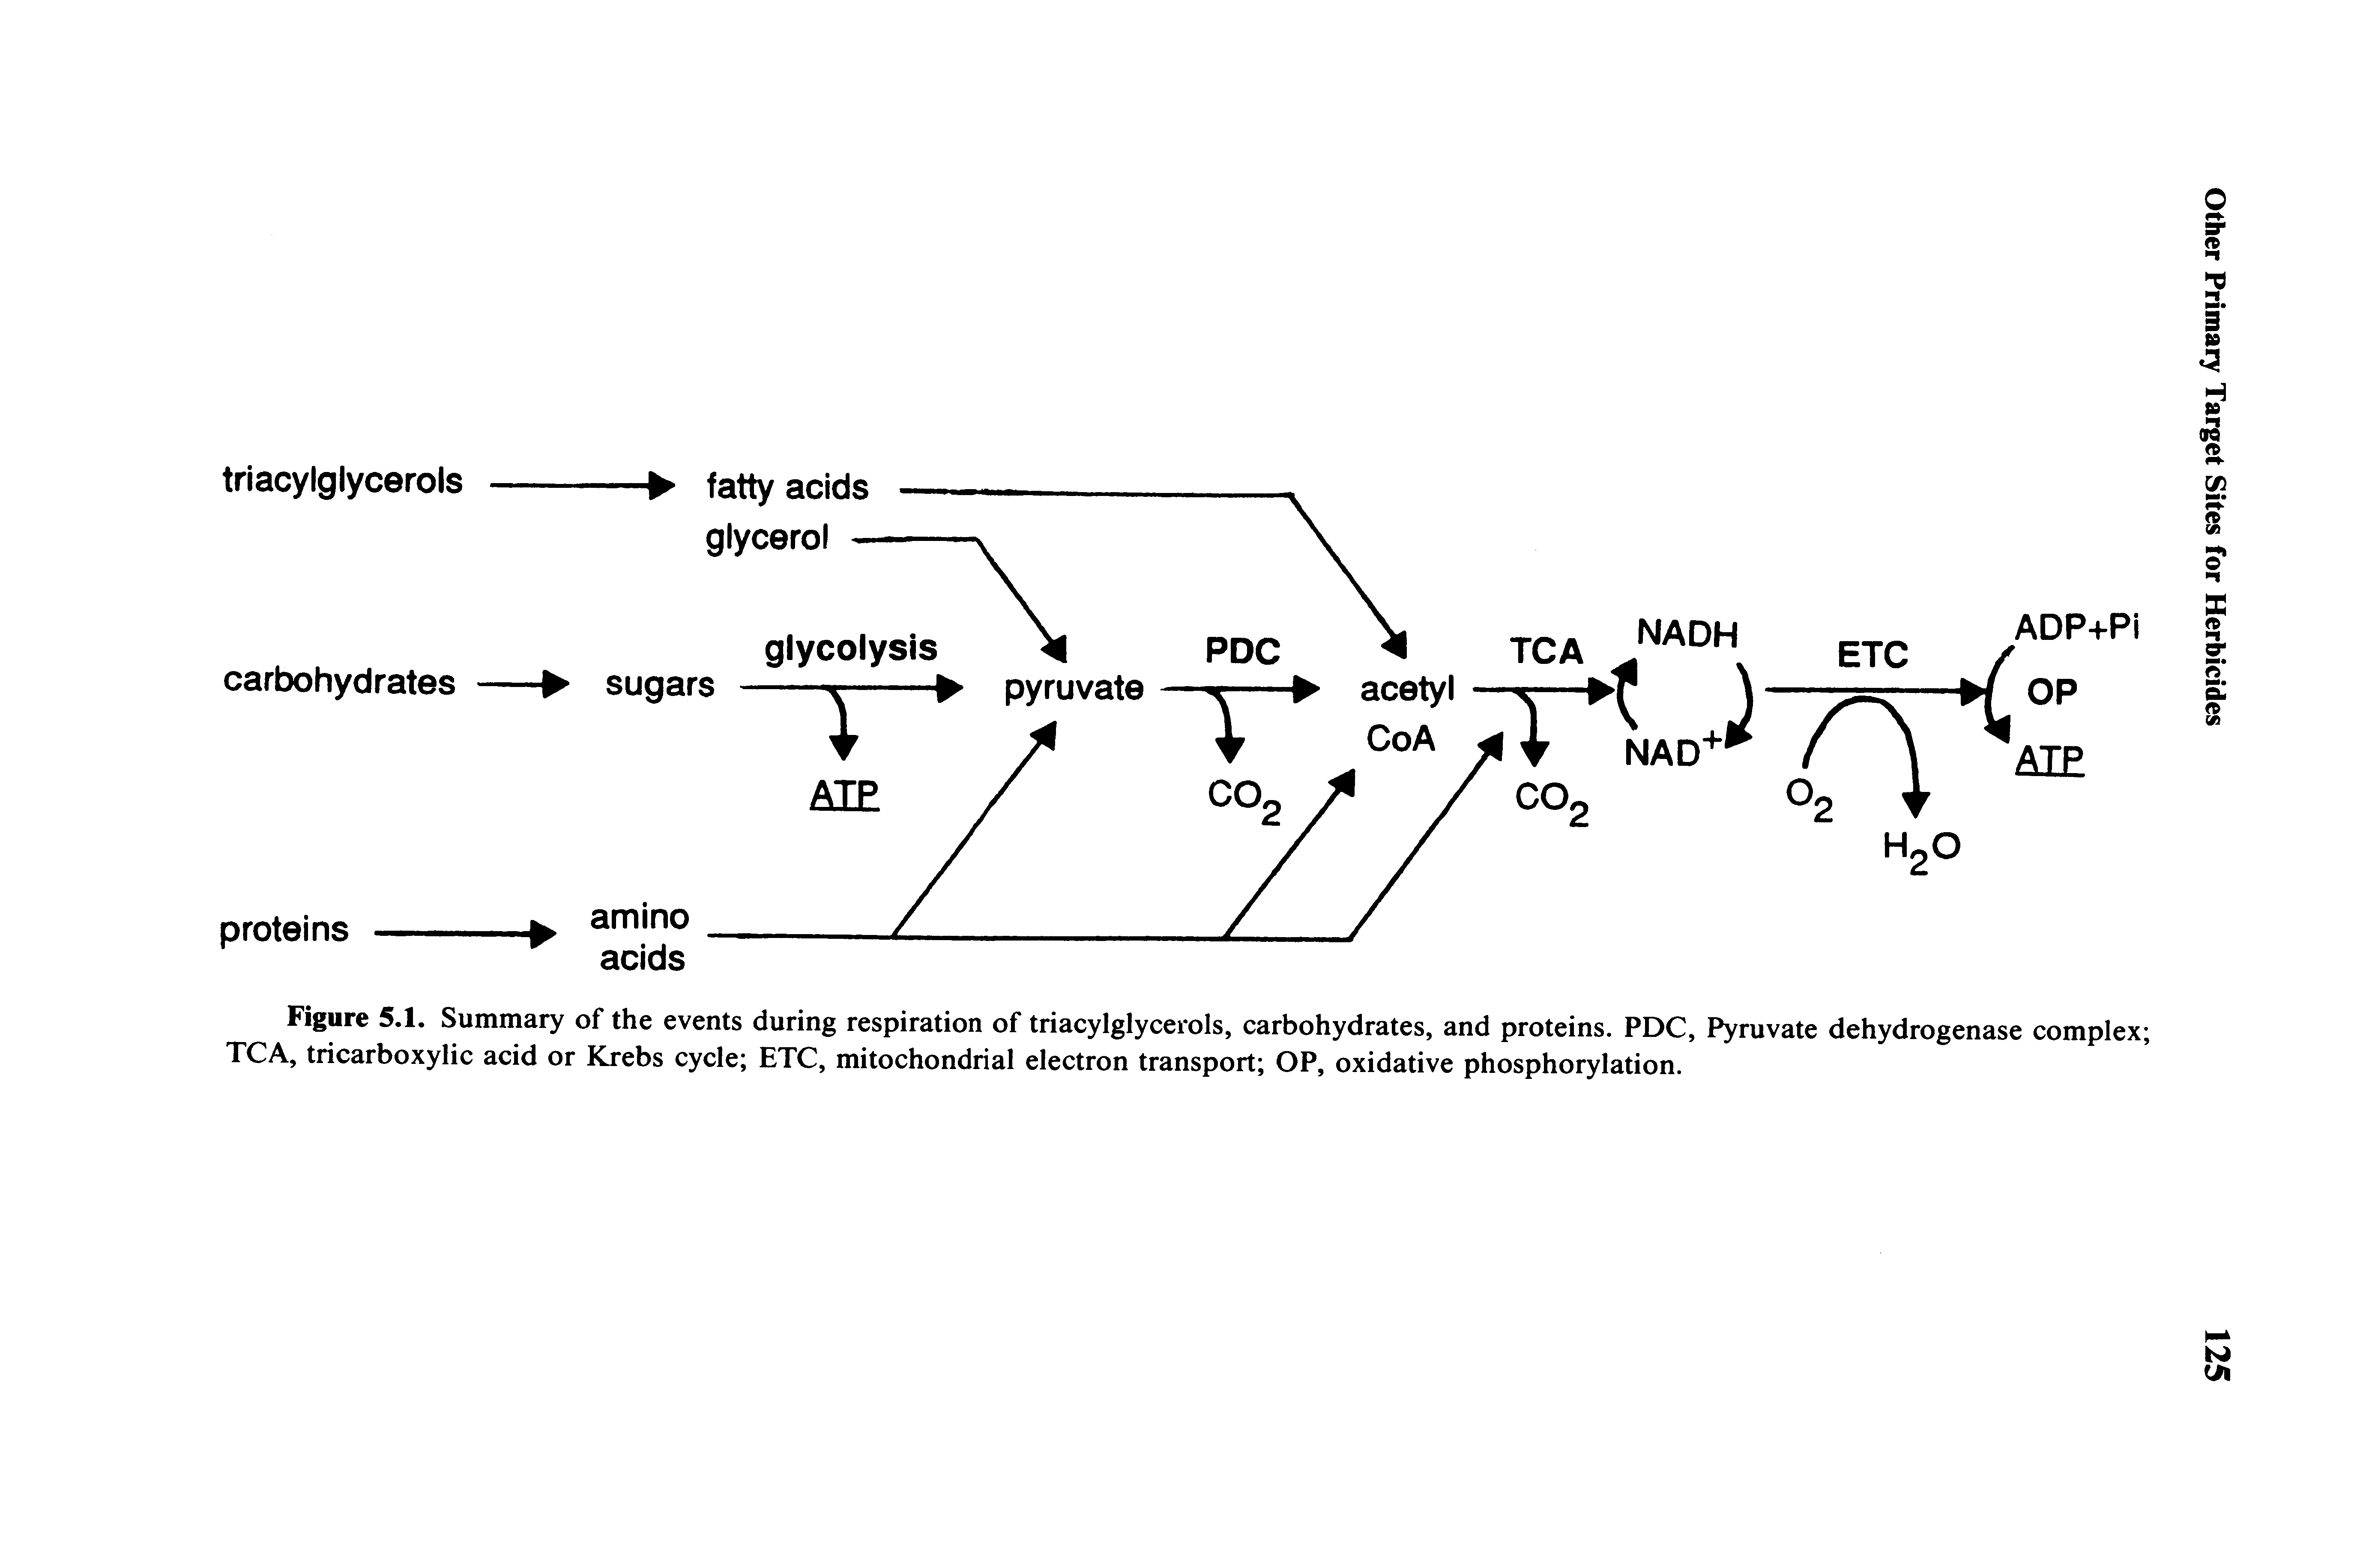 Figure 5.1. Summary of the events during respiration of triacylglycerols, carbohydrates, and proteins. PDC, Pyruvate dehydrogenase complex TCA, tricarboxylic acid or Krebs cycle ETC, mitochondrial electron transport OP, oxidative phosphorylation.